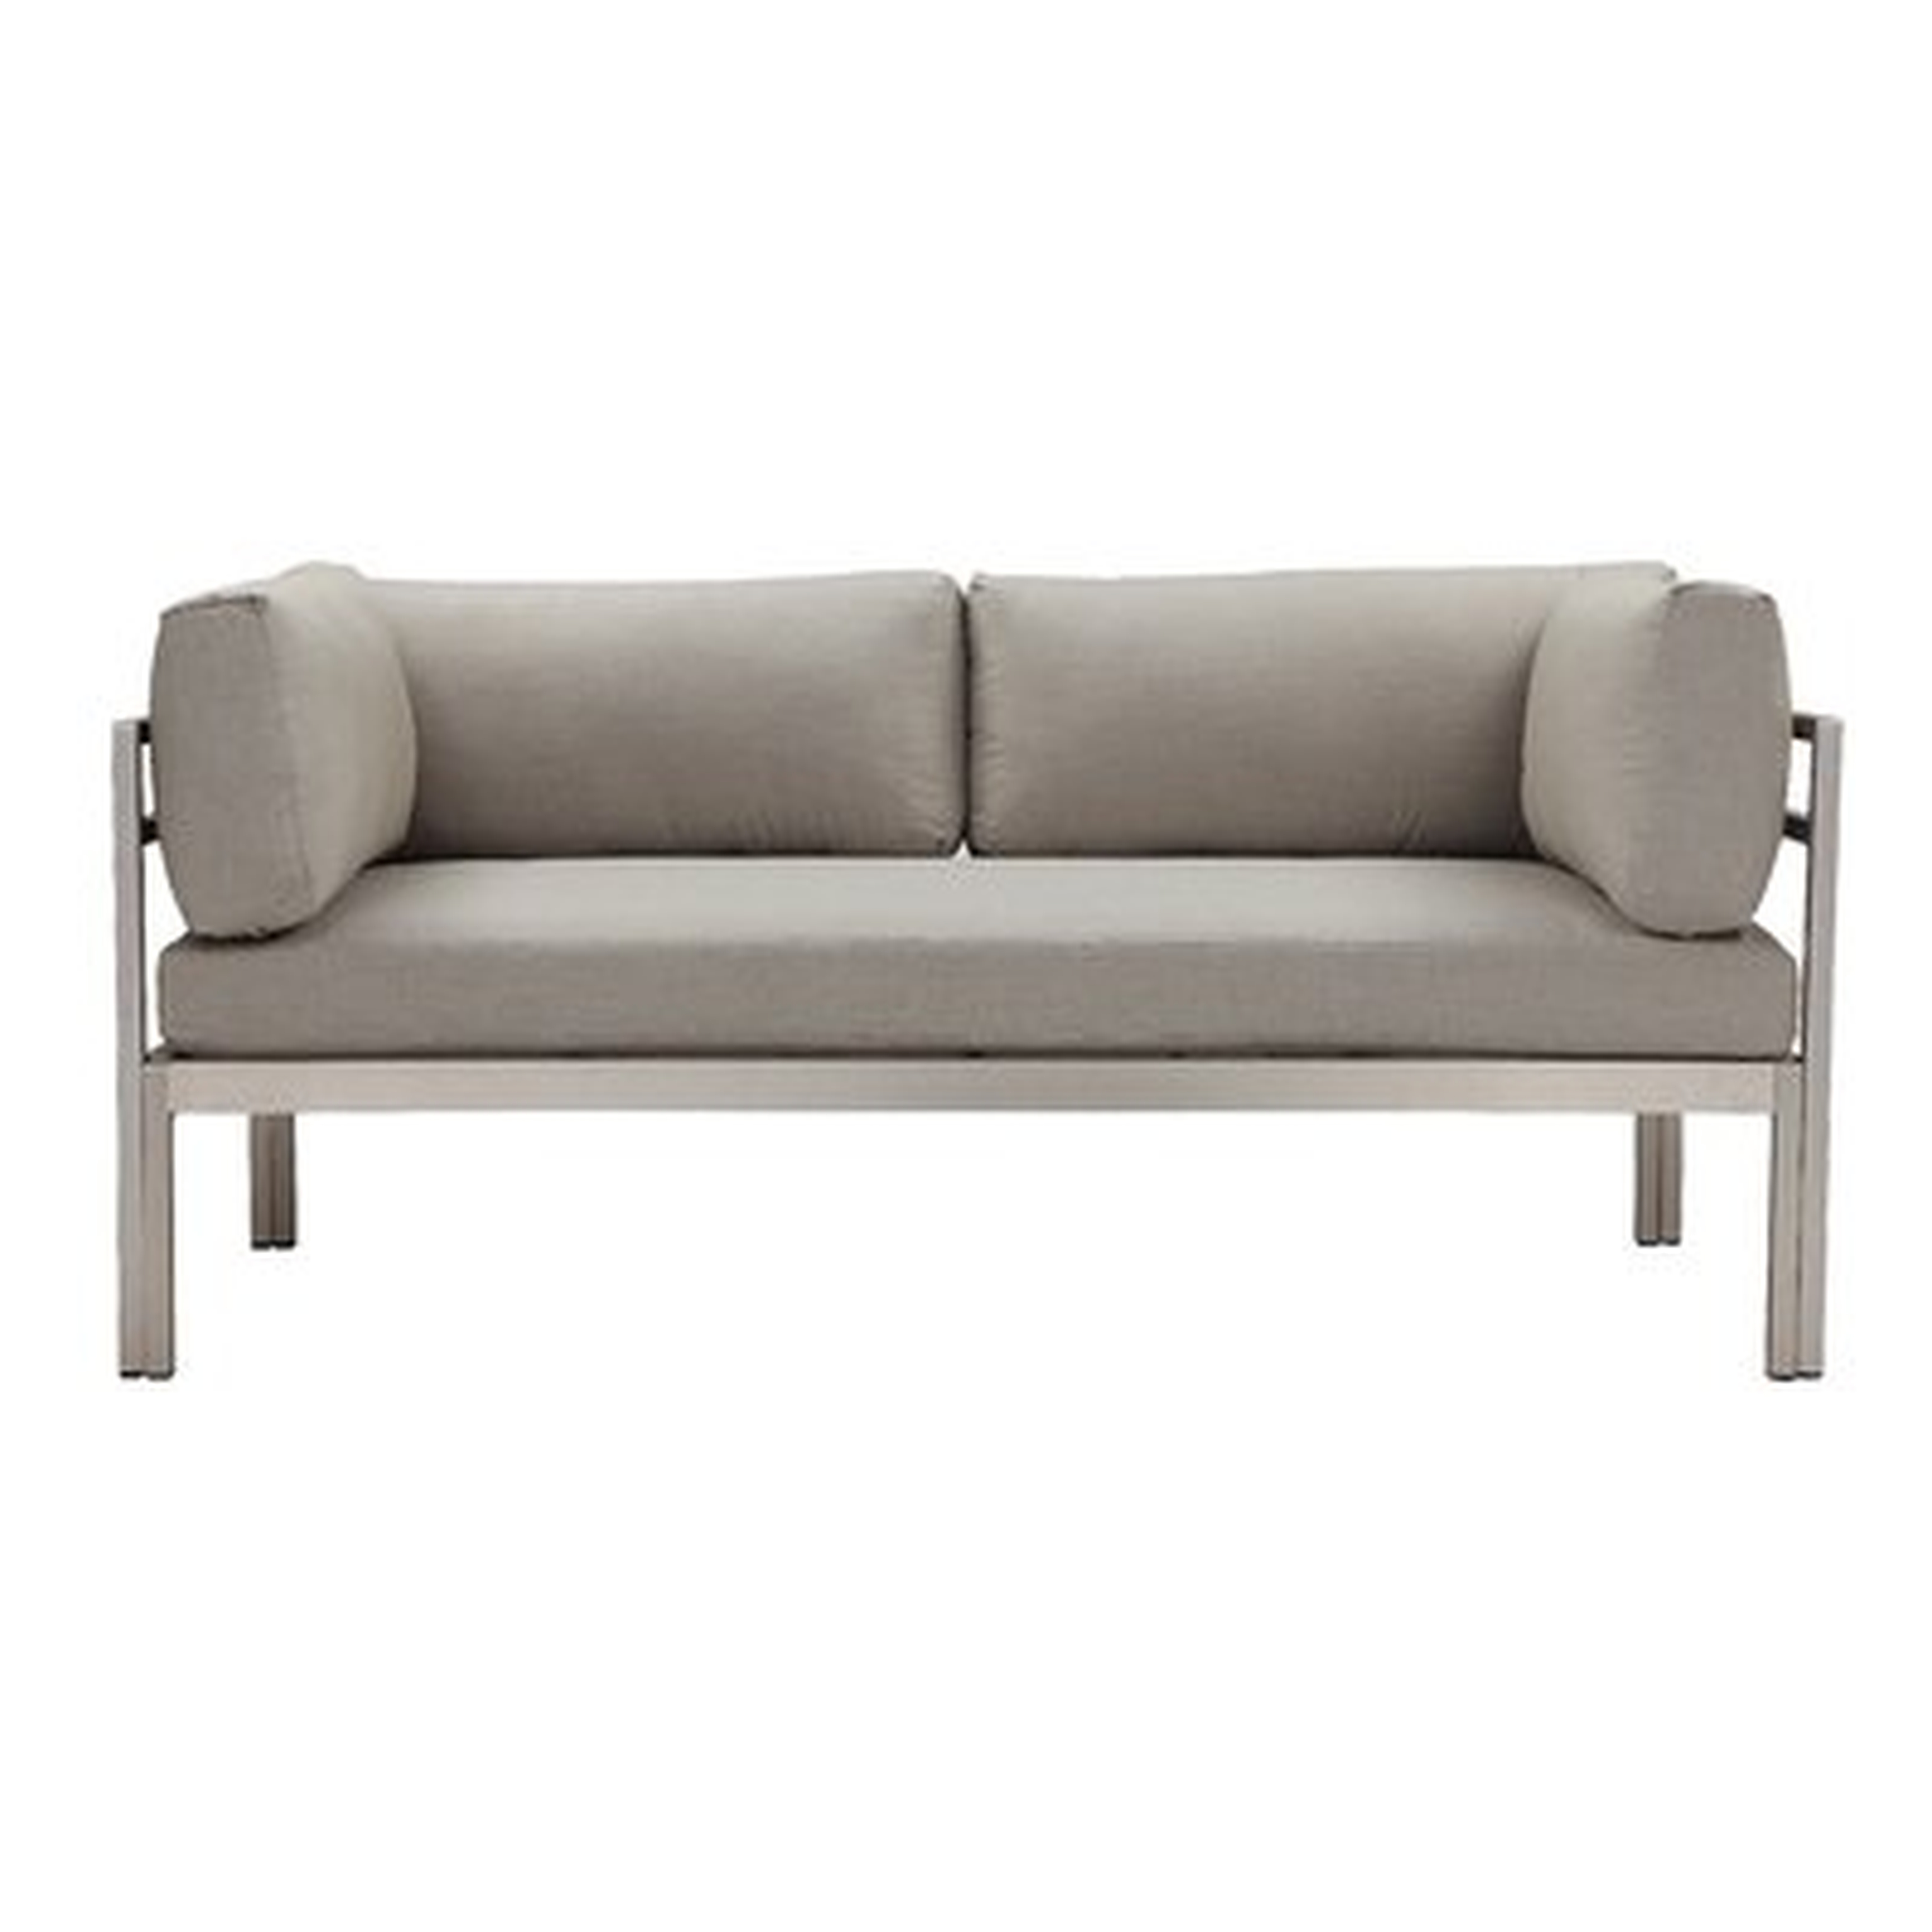 Valmont Loveseat with Cushions - Wayfair